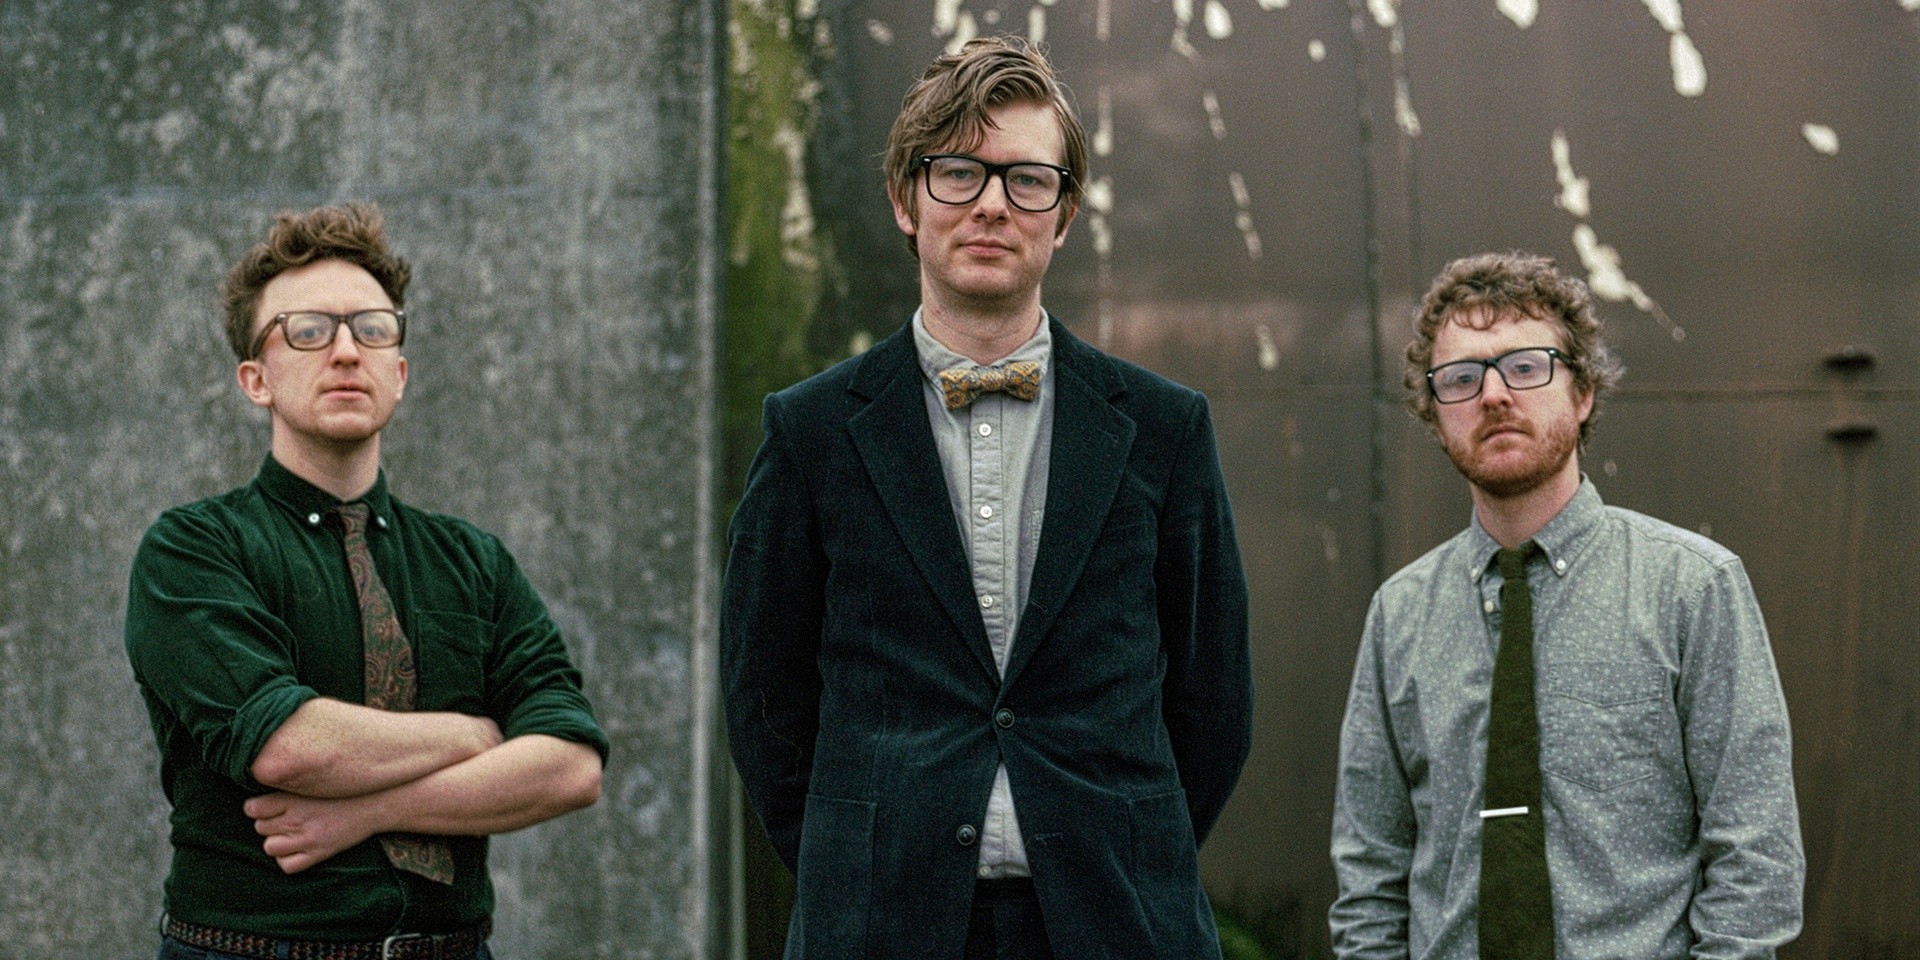 Public Service Broadcasting take their instrumental music to lofty, political heights